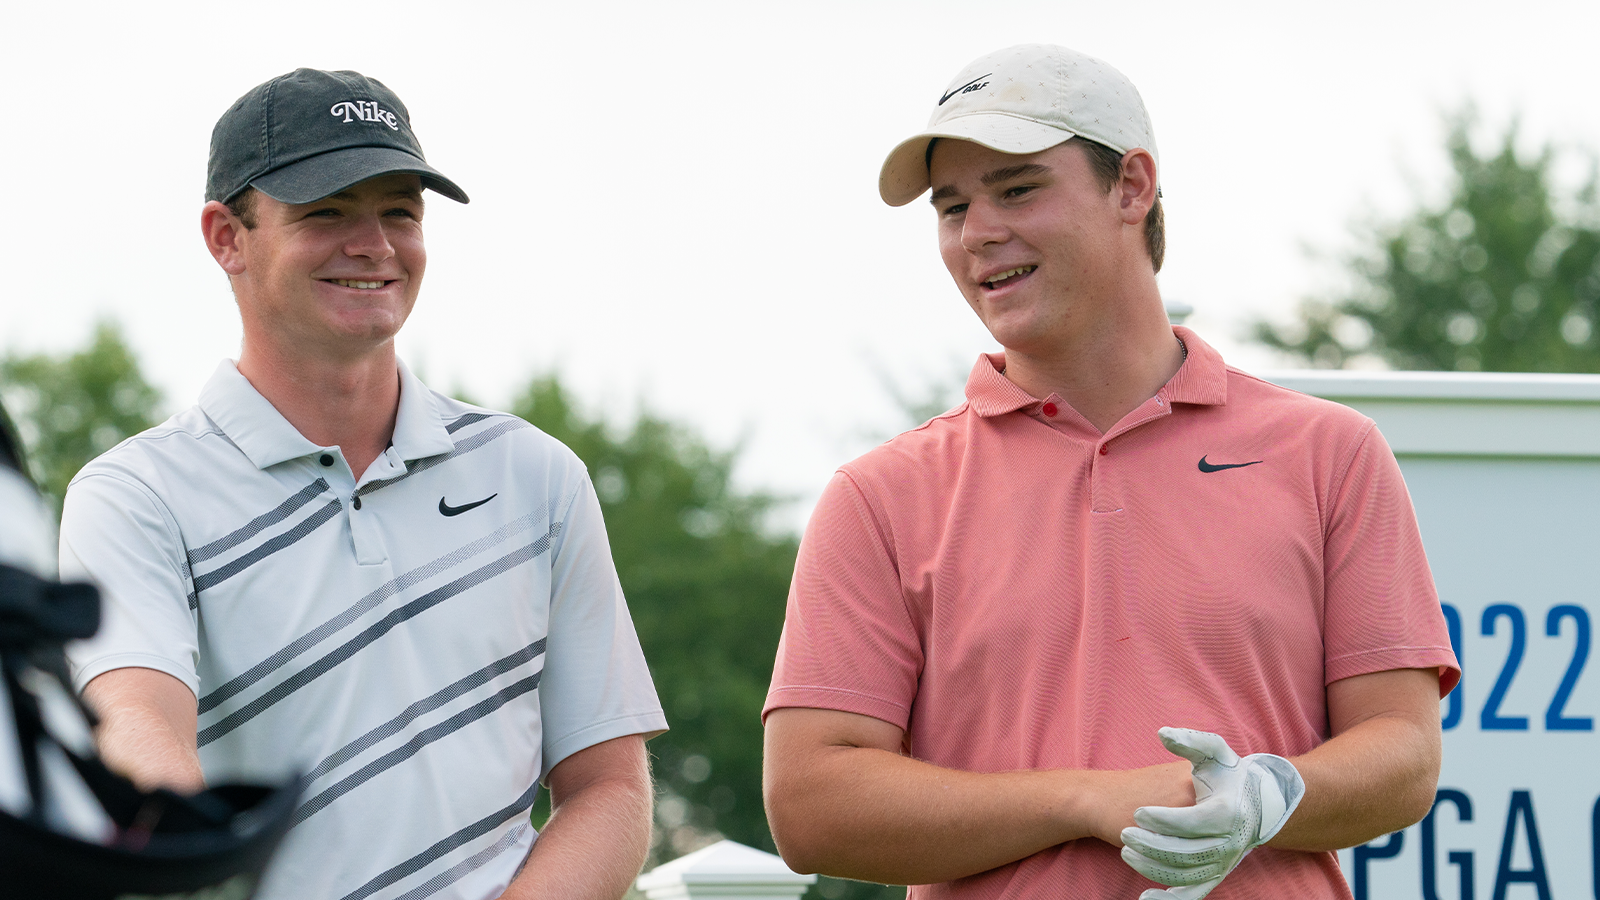 Nicholas Gross and Max Herendeen on the first hole during the third round for the 46th Boys and Girls Junior PGA Championship held at Cog Hill Golf & Country Club on August 4, 2022 in Lemont, Illinois. (Photo by Hailey Garrett/PGA of America)

